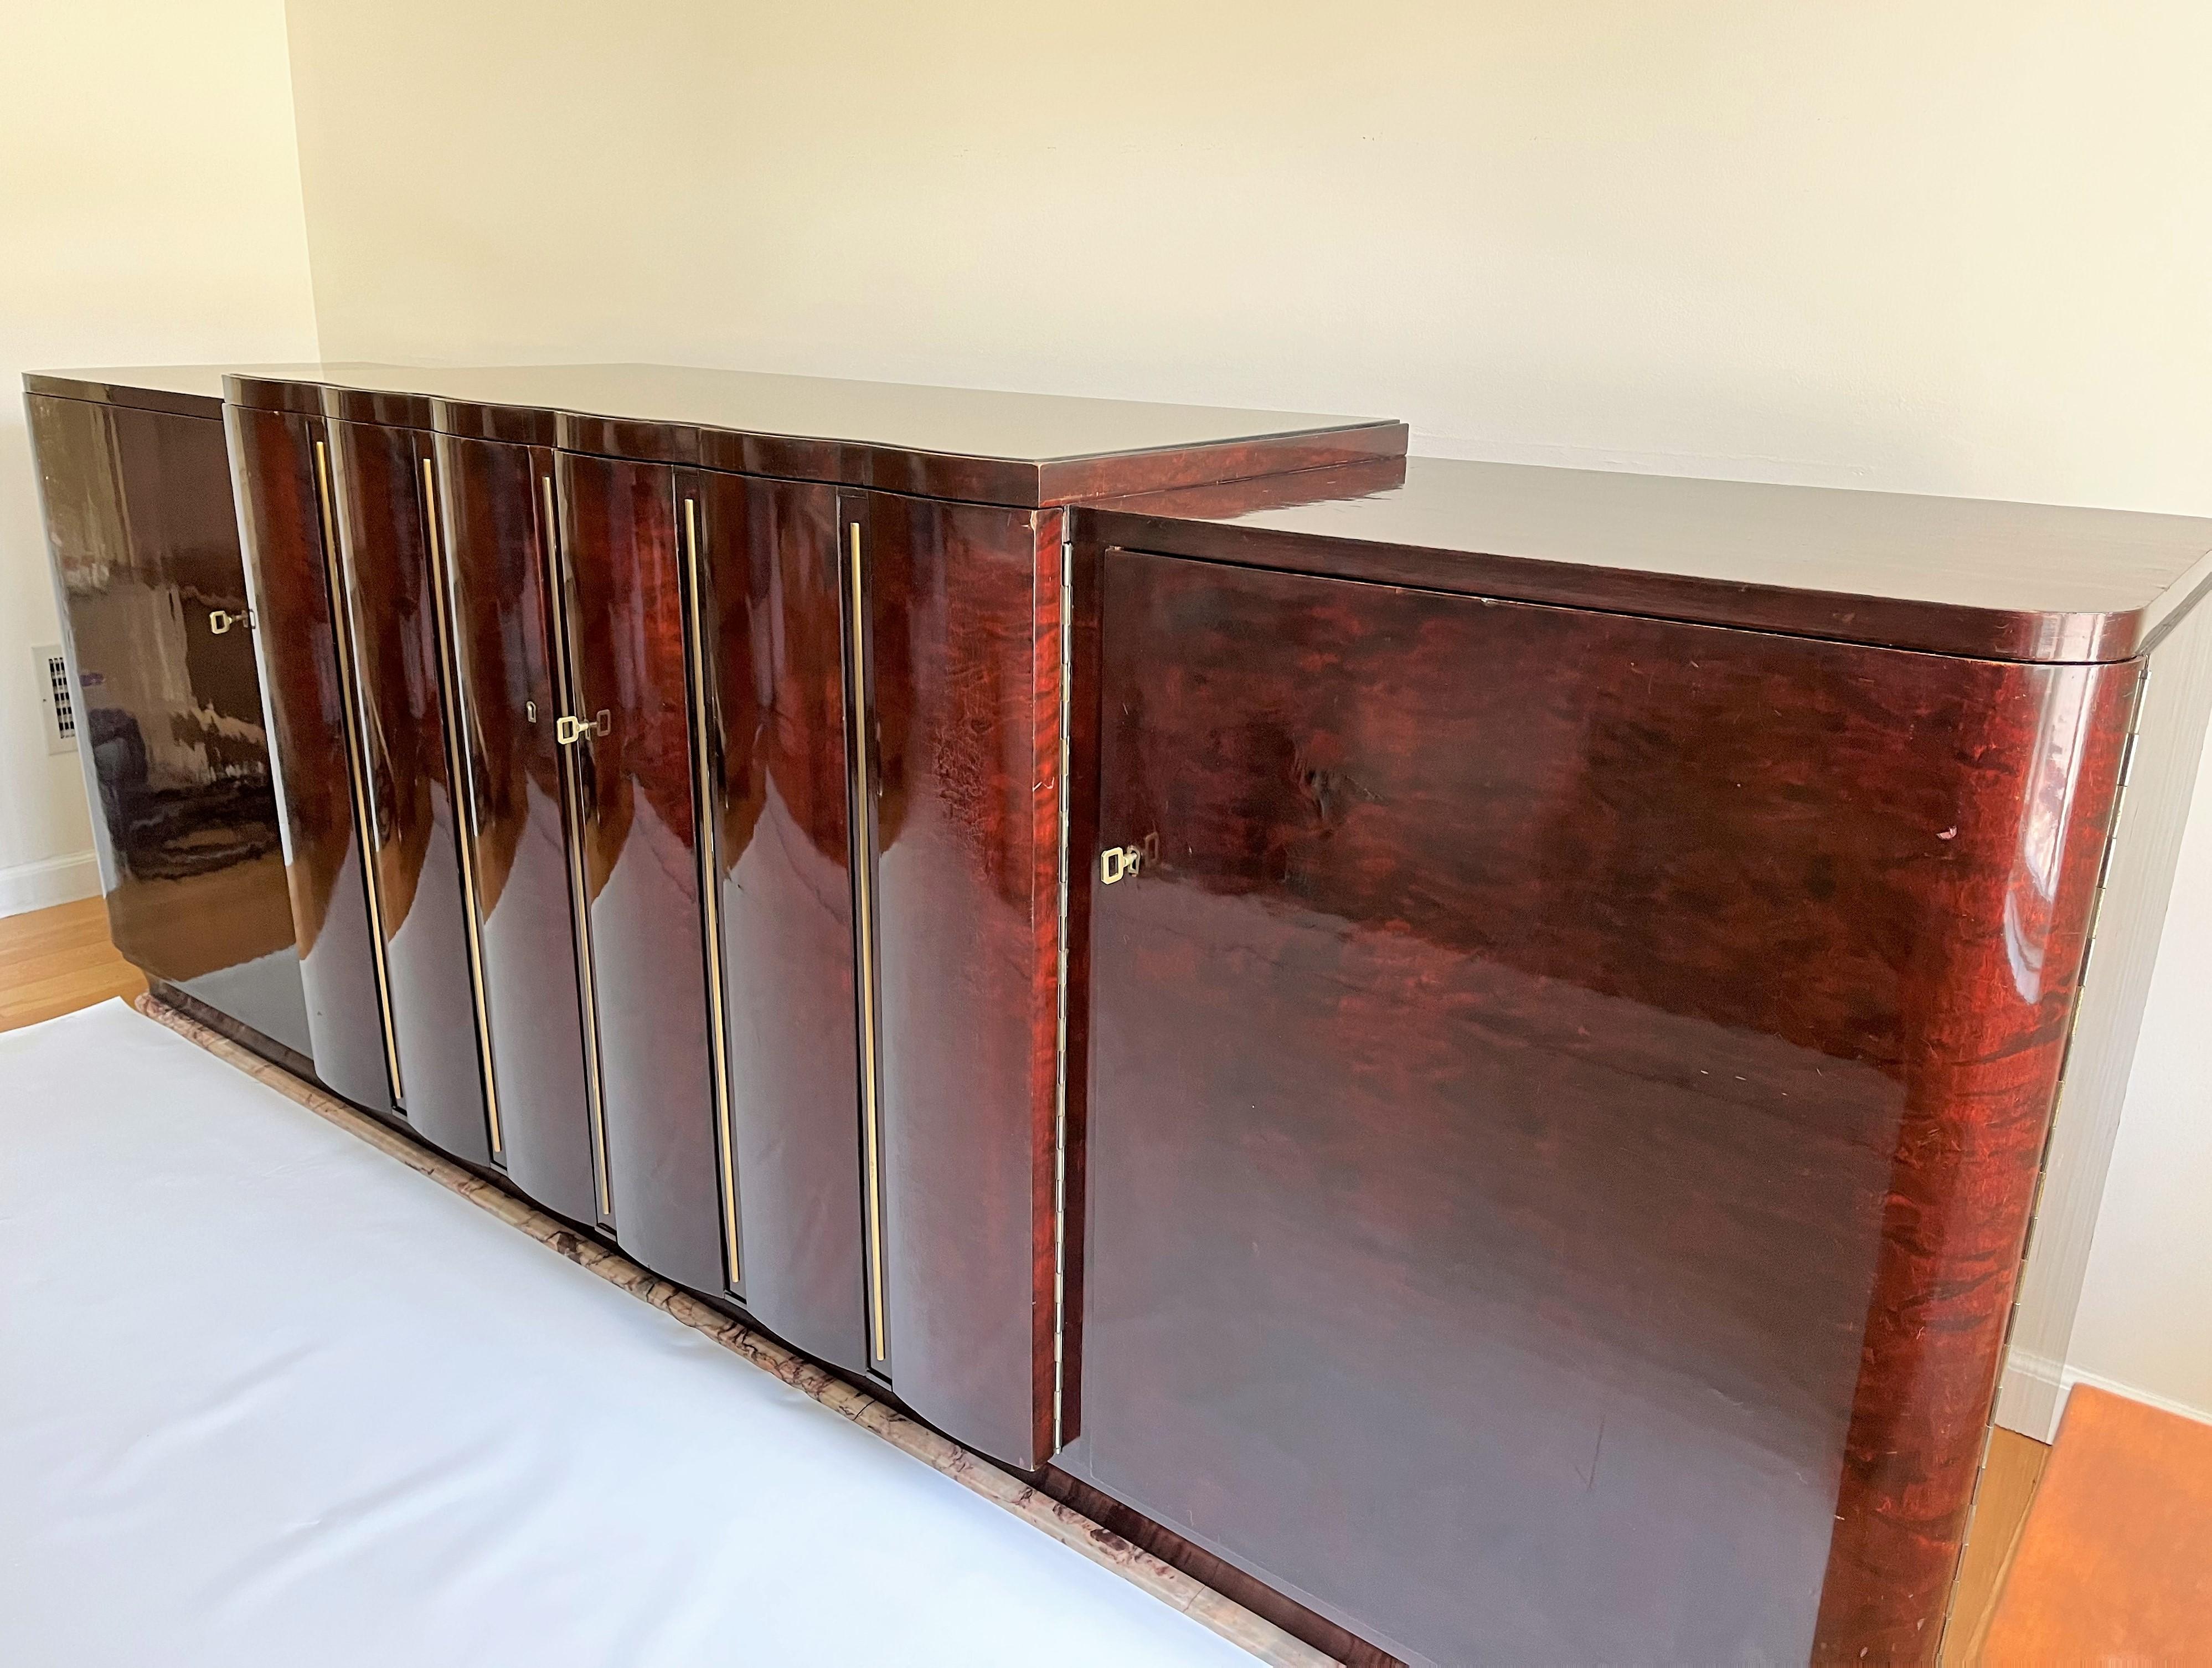 Exceptional Art Deco sideboard, flamed-rosewood veneer, in the middle 4 drawers, 3 shelves, 2 scalloped doors with brass vertical design and smoked mirrored scalloped top, on both sides curved doors, 3 shelves and flamed-rosewood veneered top,